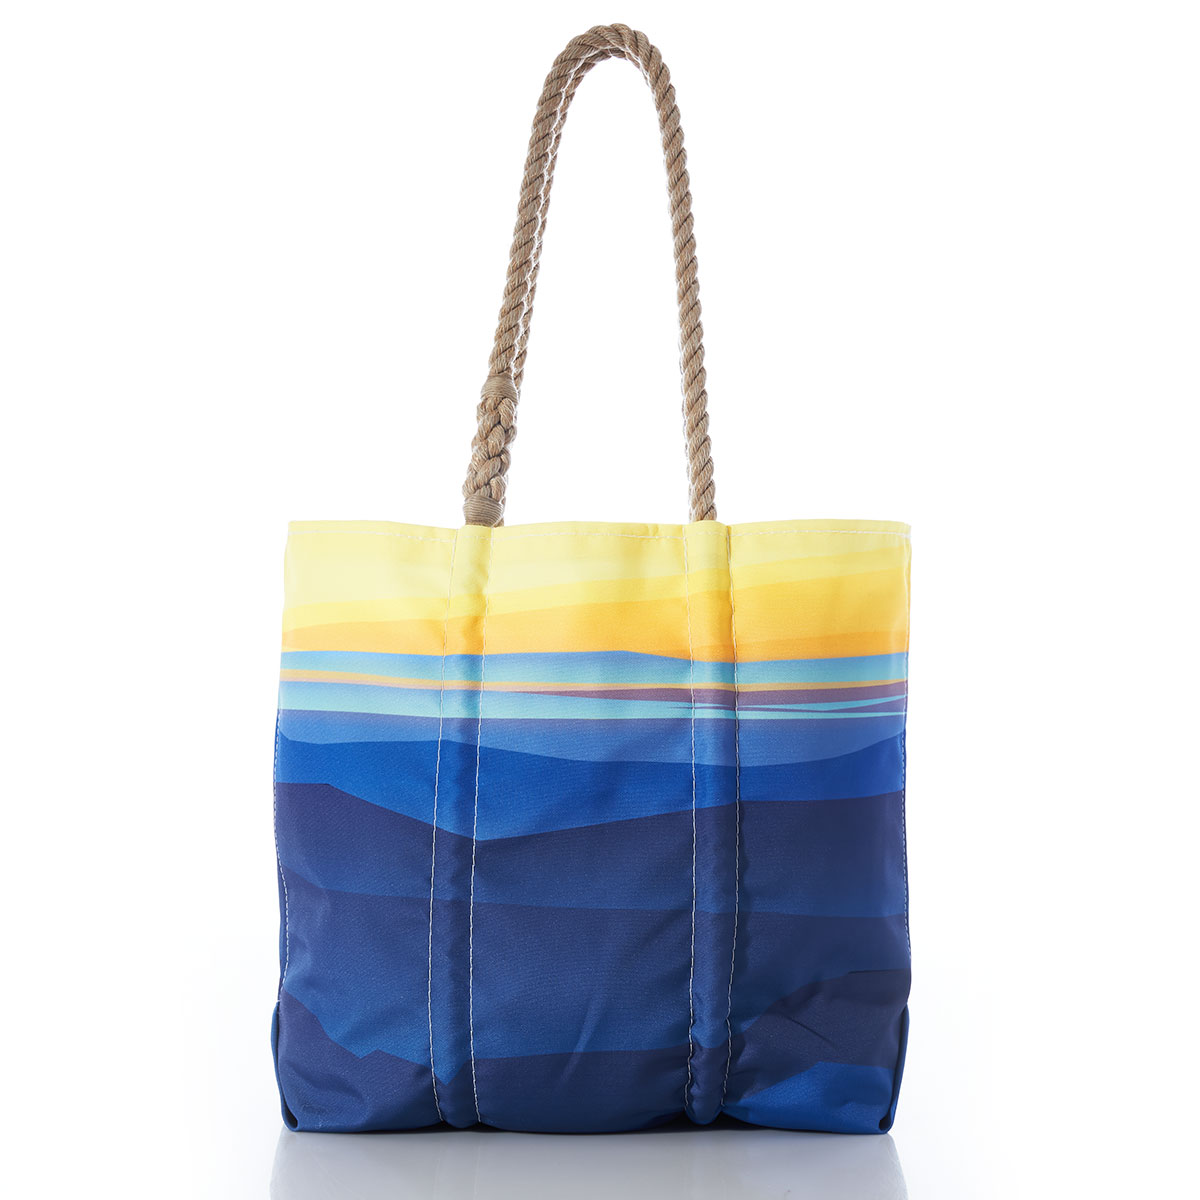 recycled sail cloth medium tote with hemp rope handles printed with a landscape of a yellow sunrise over blue mountains and water